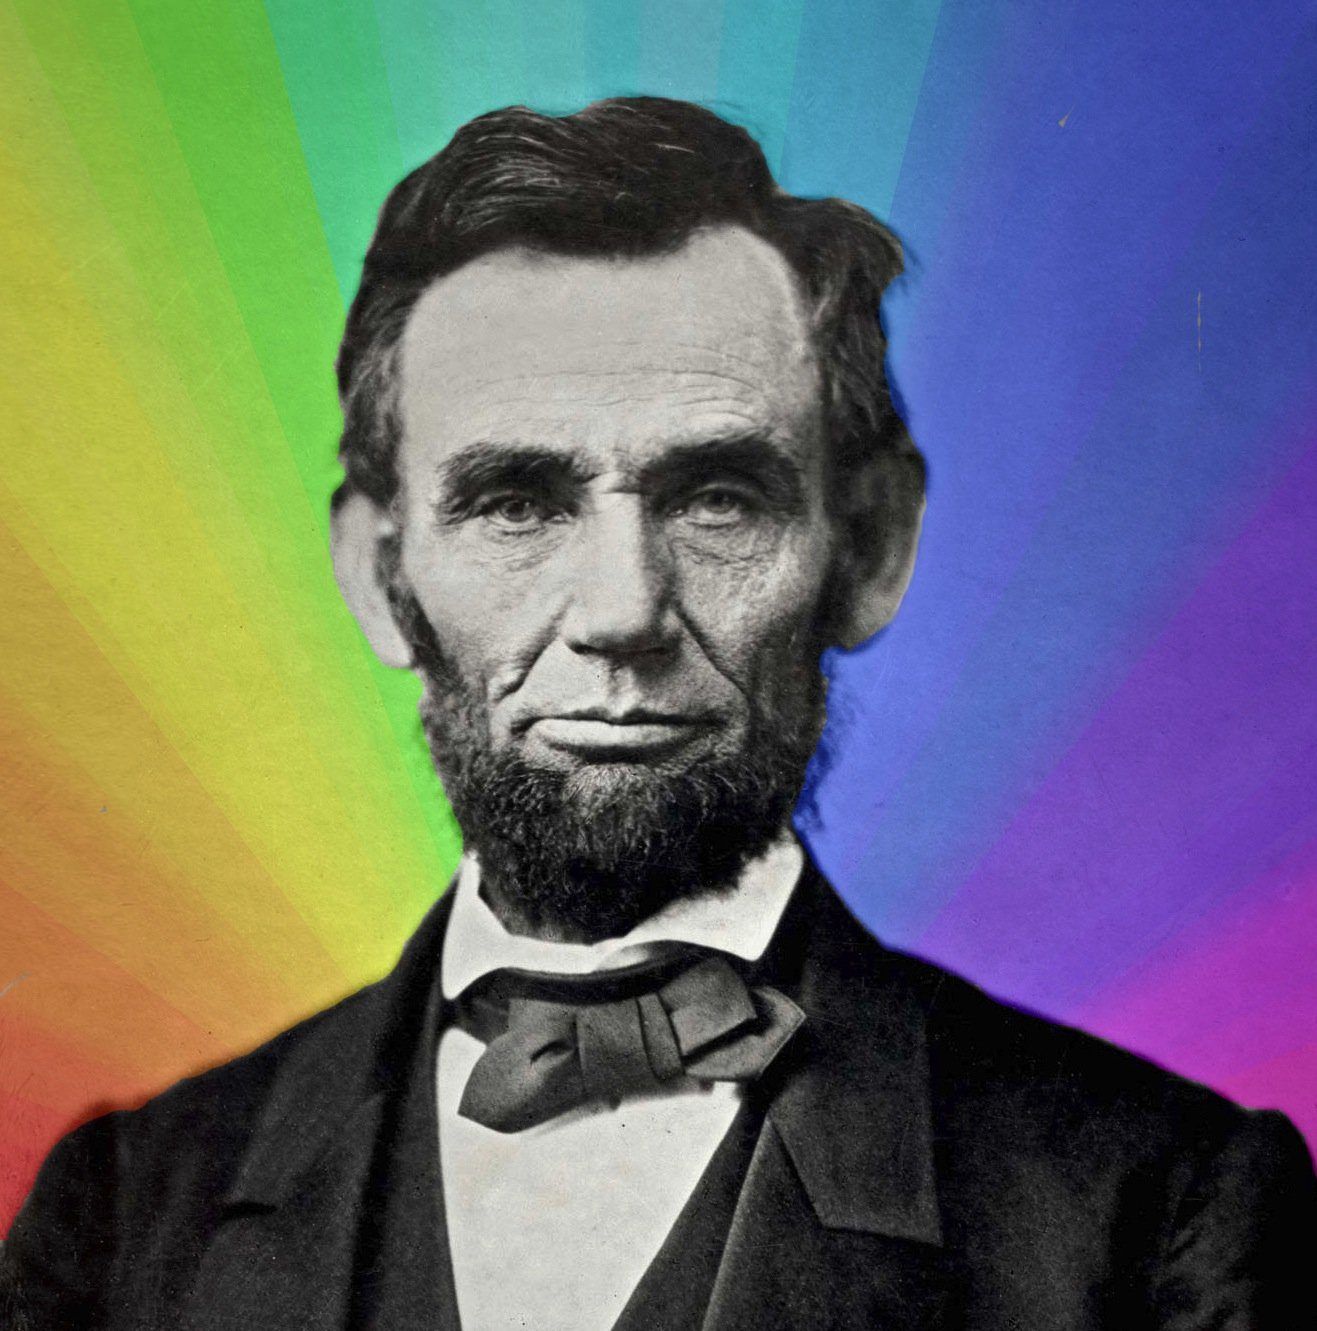 Hot B. reccomend Was abraham lincoln bisexual